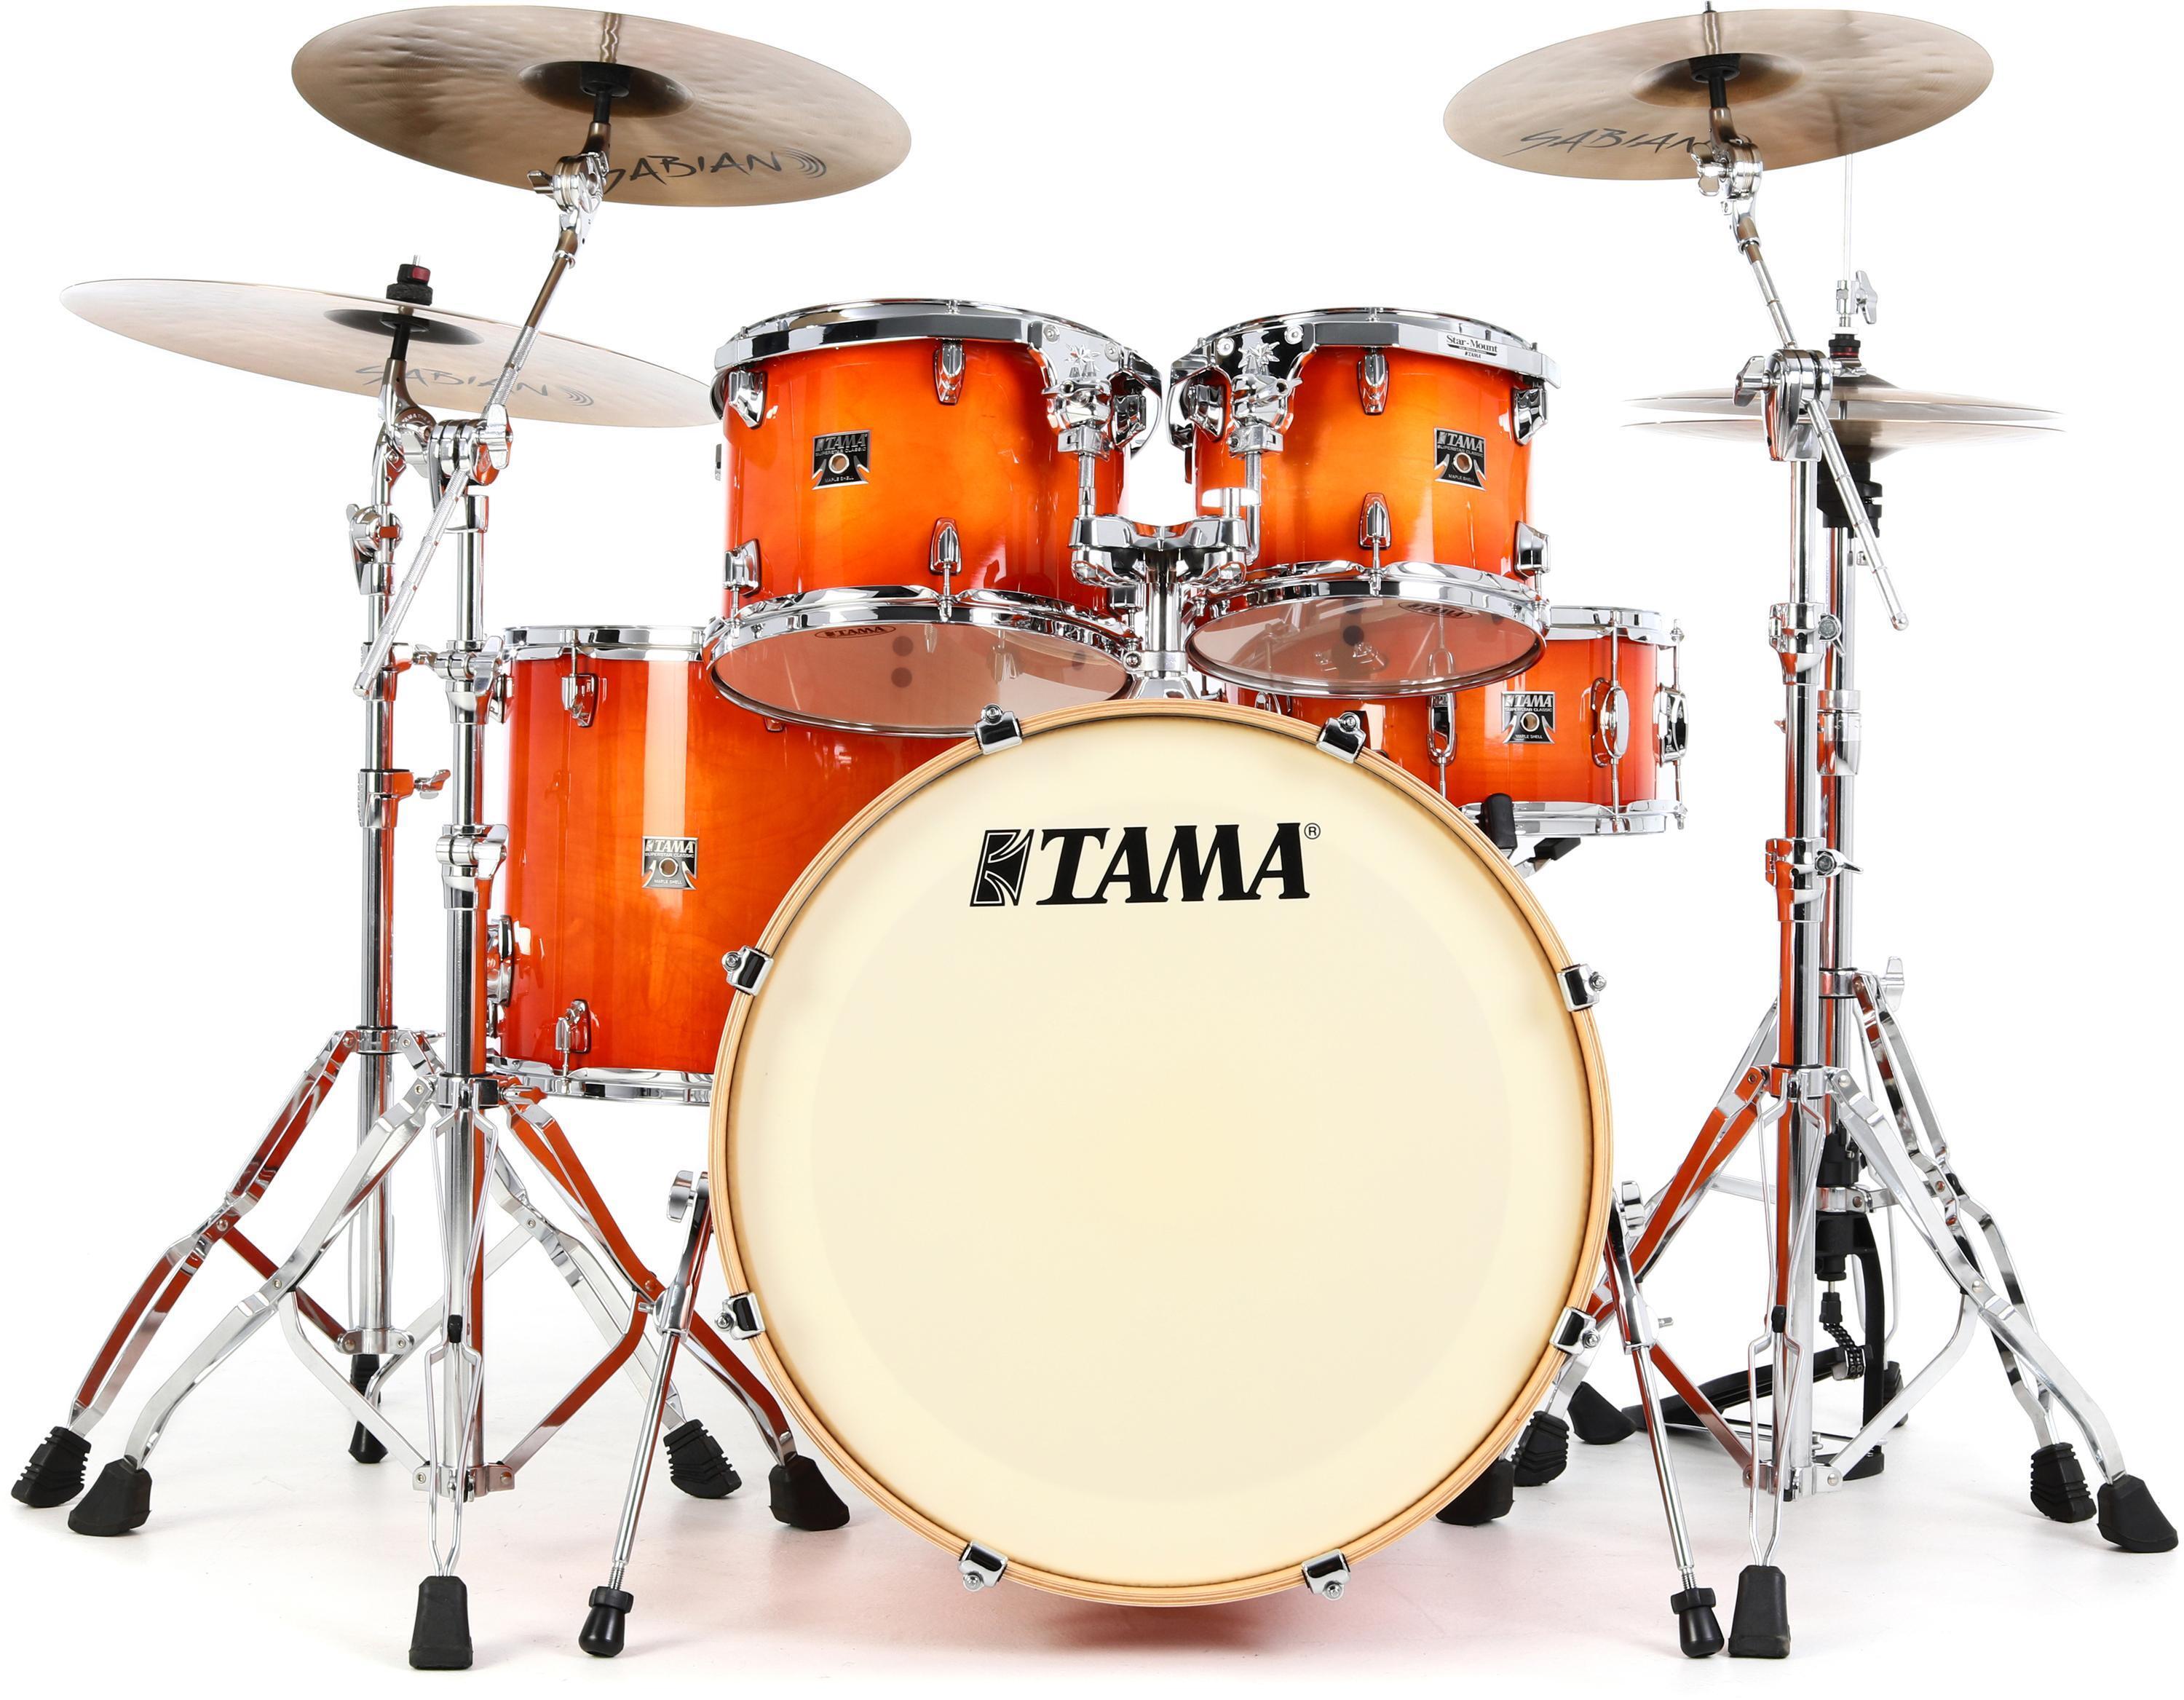 Tama Superstar Classic CL52KS 5-piece Shell Pack with Snare Drum -  Tangerine Lacquer Burst